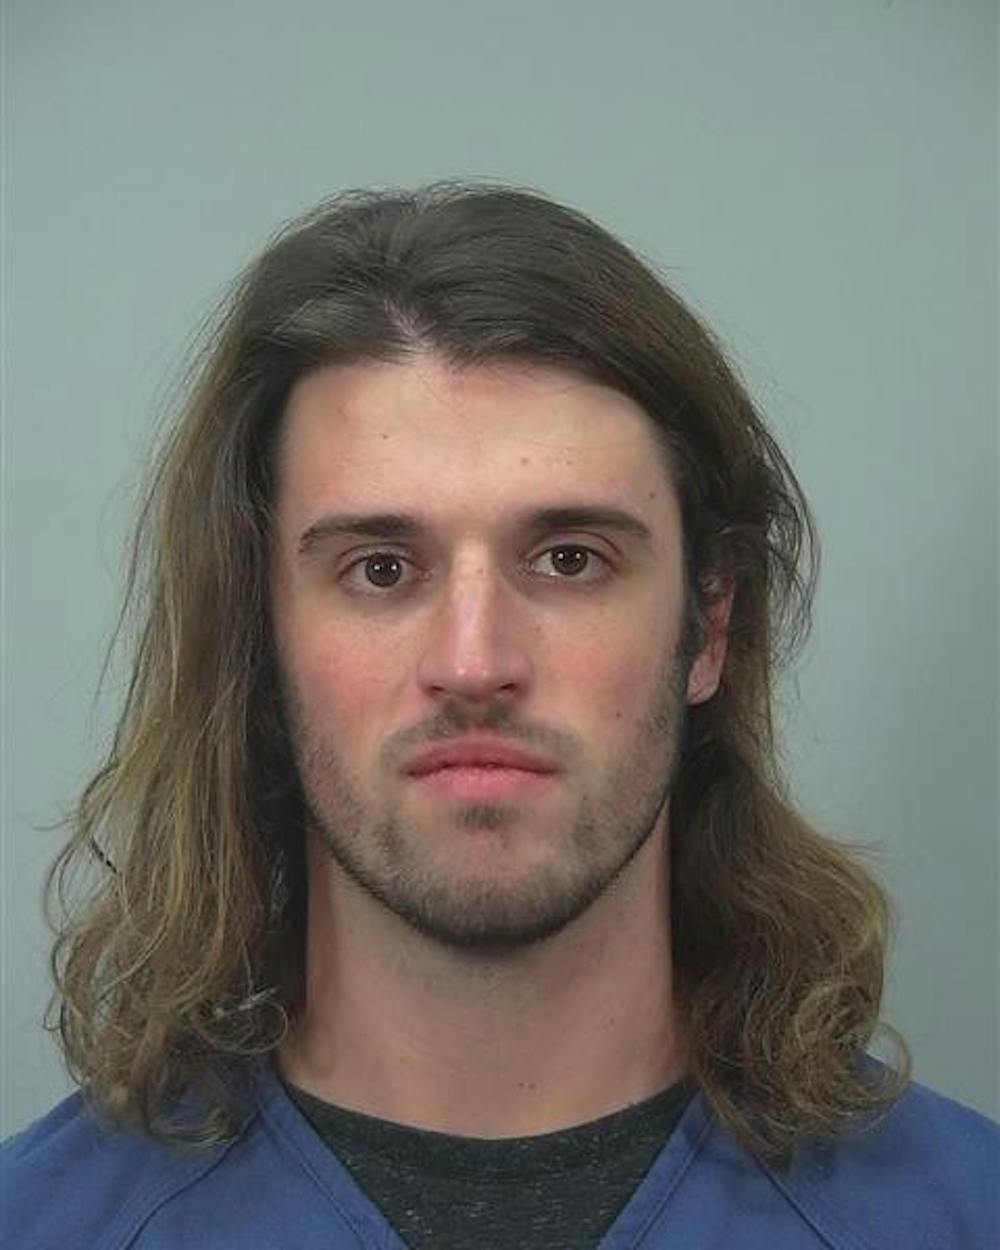 Alec Cook , a 20-year-old UW-Madison student, has been tentatively charged with a second sexual assault after another victim came forward.